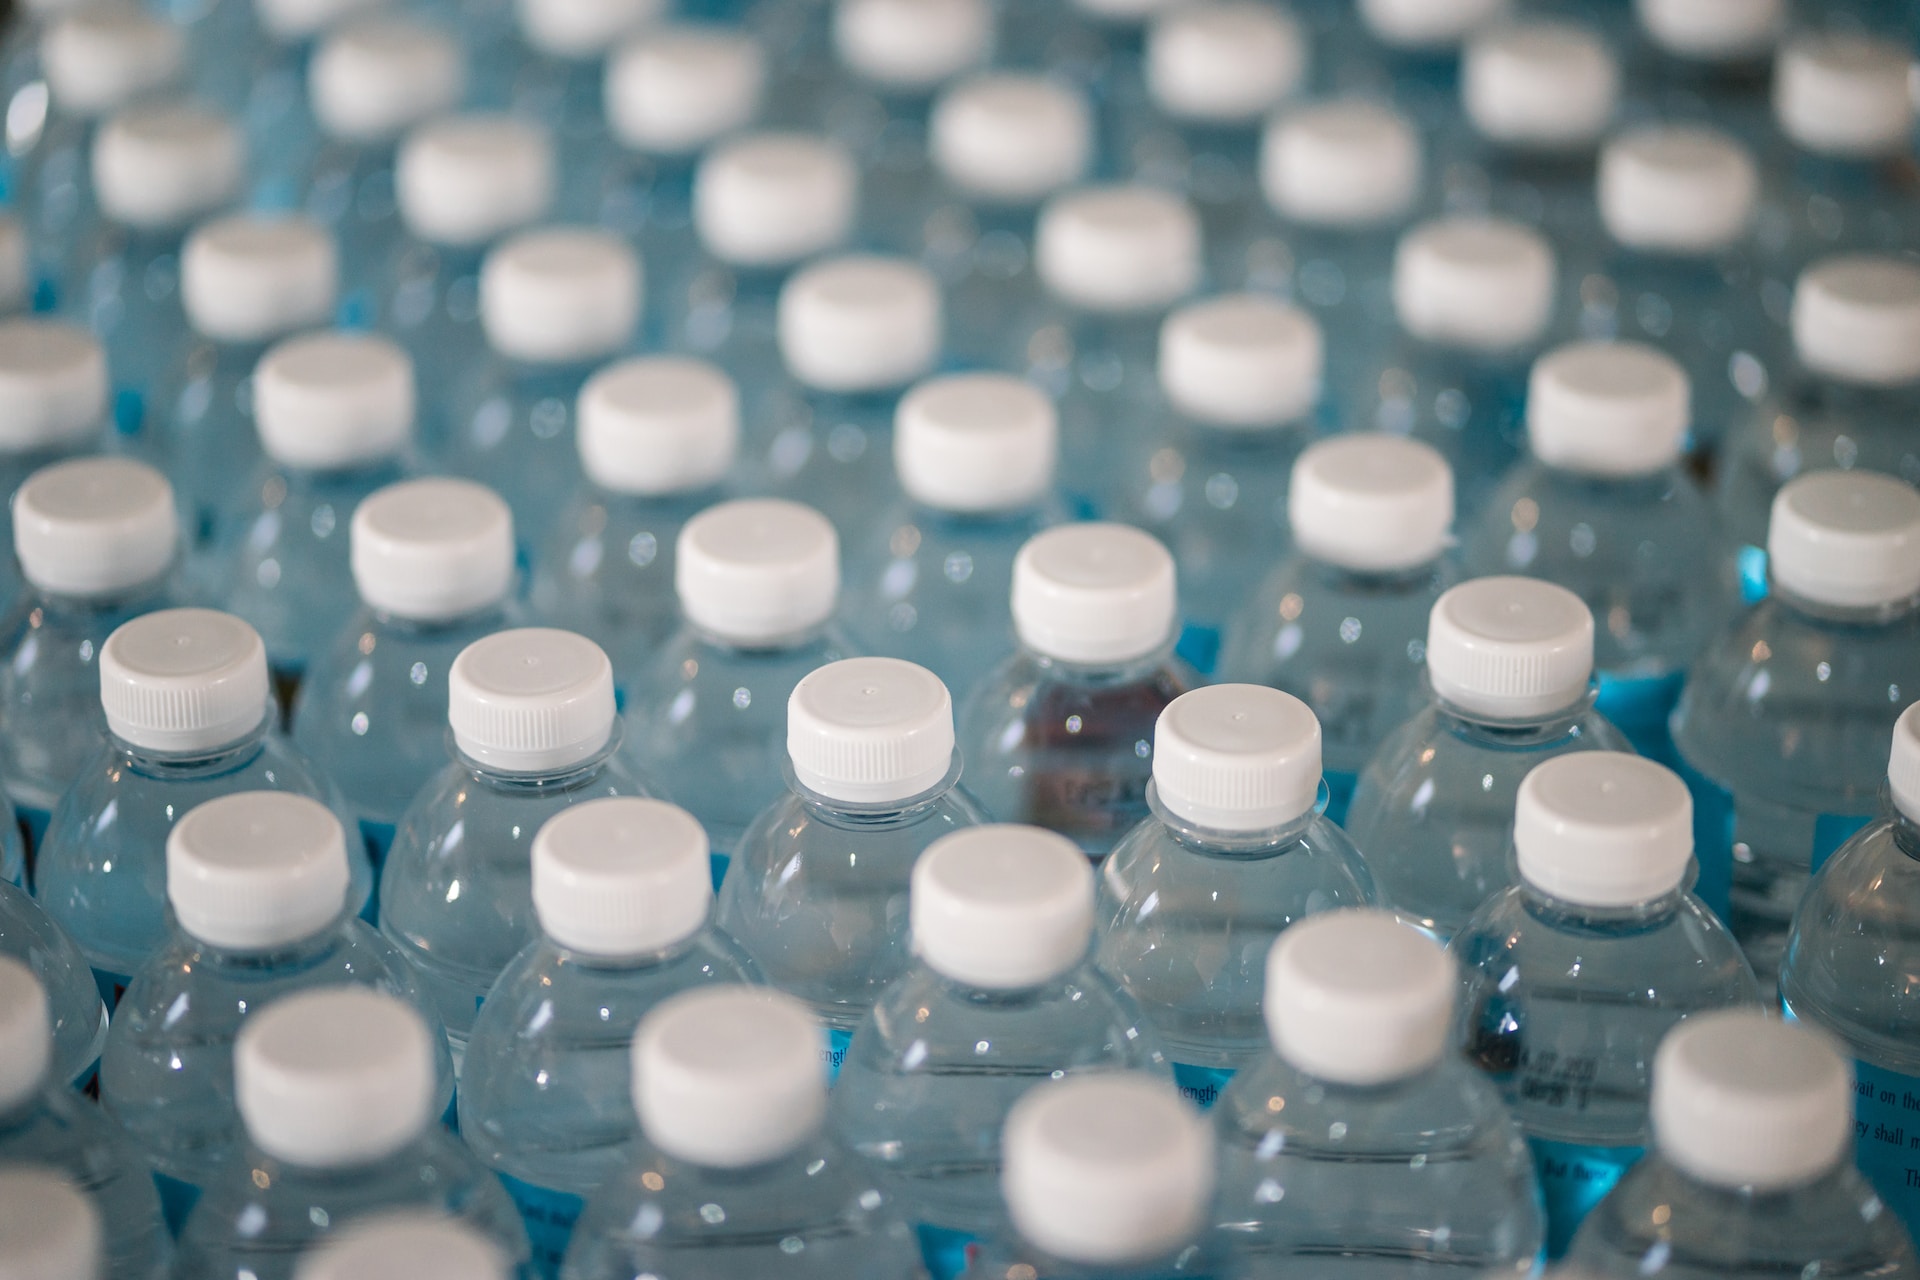 All You Need to Know About PFAS in Your Water - How to Find Safe Brands and Products.